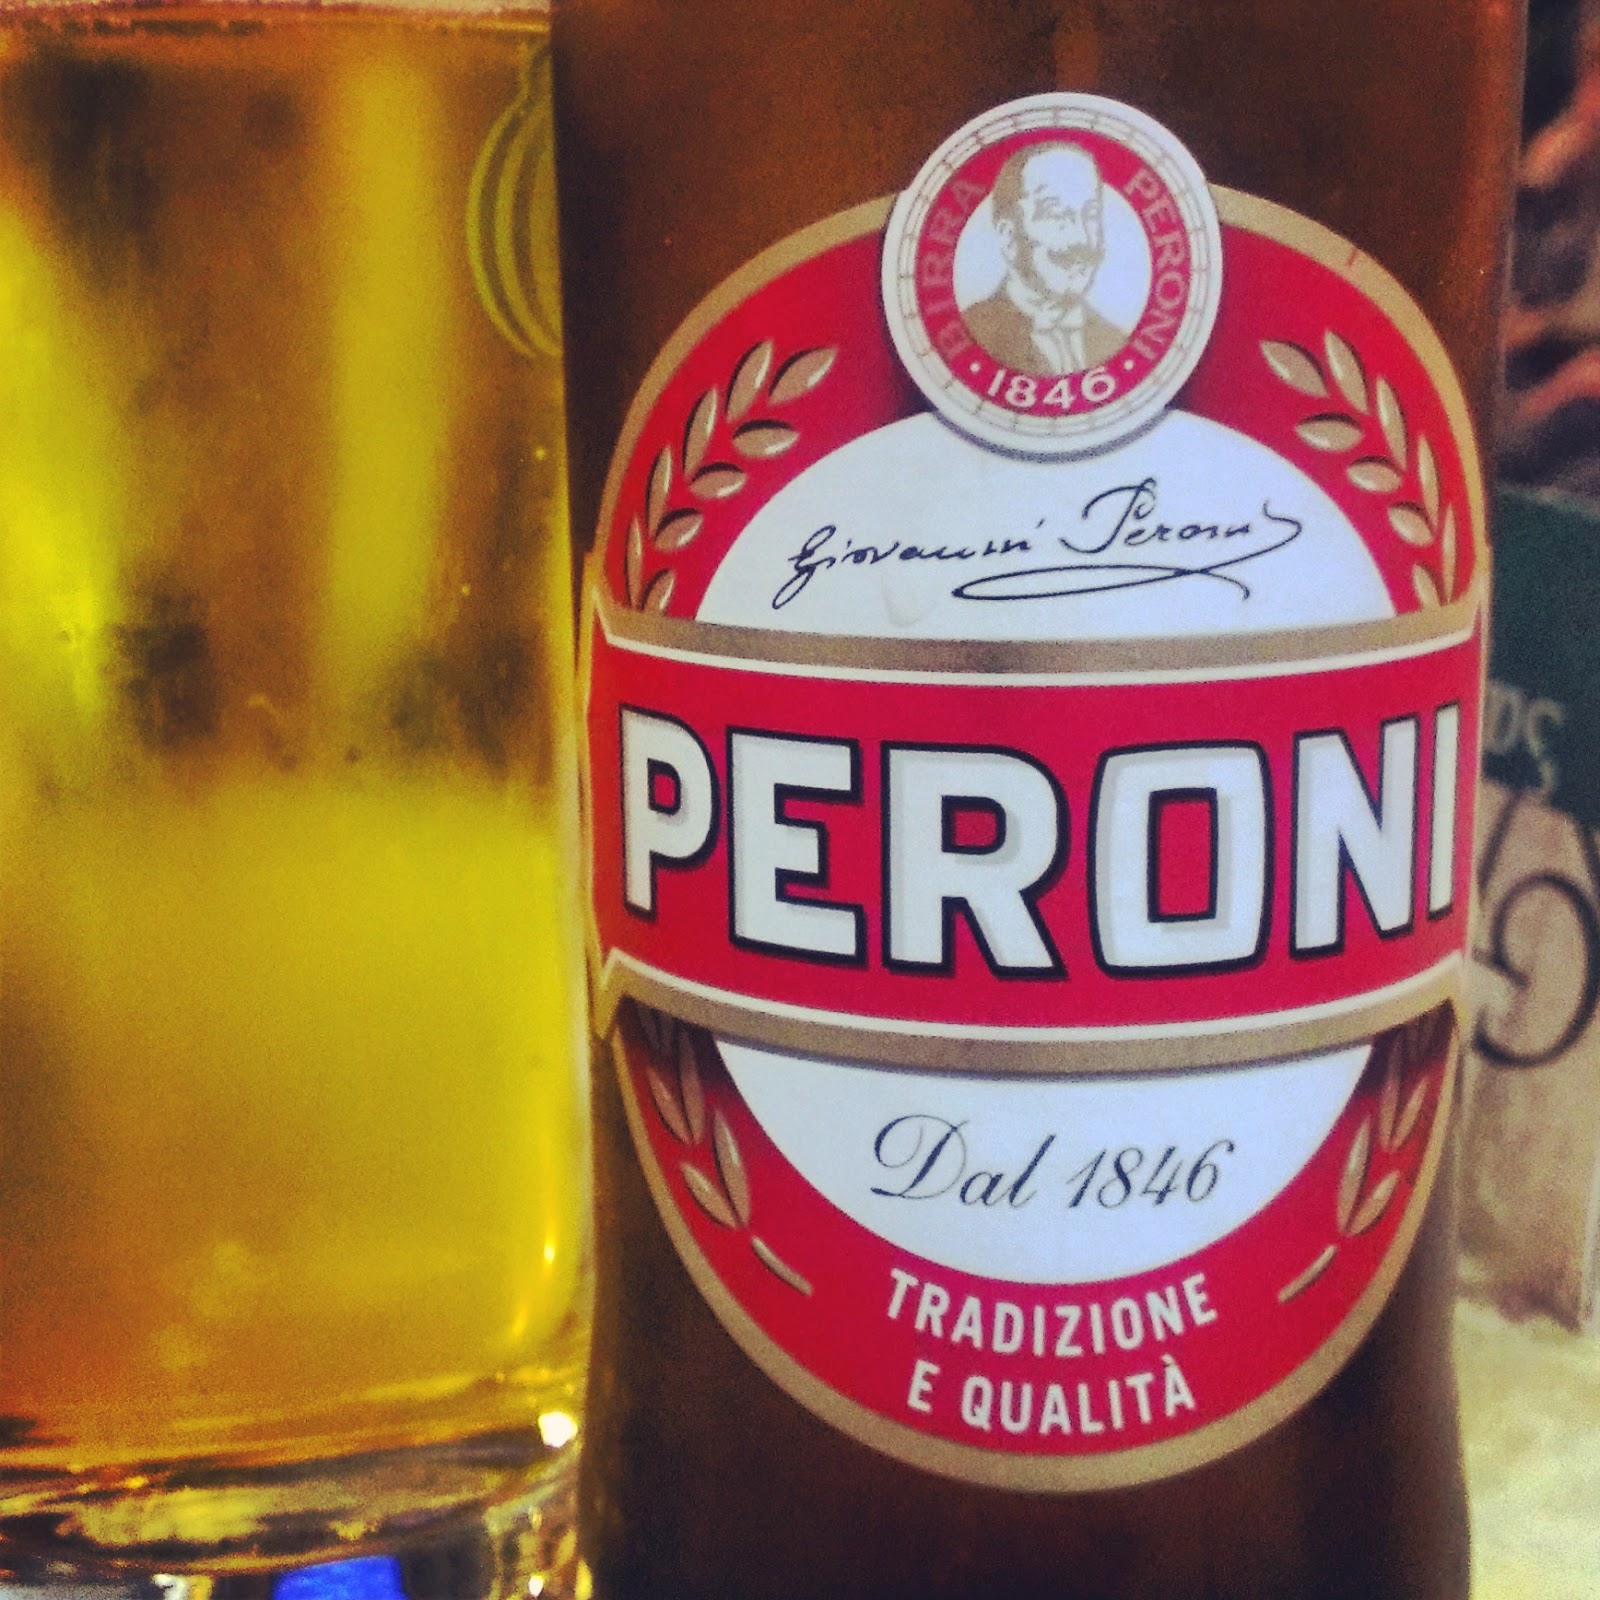 a-lovely-drop-beer-264-peroni-beer-265-peroni-chill-lemon-beer